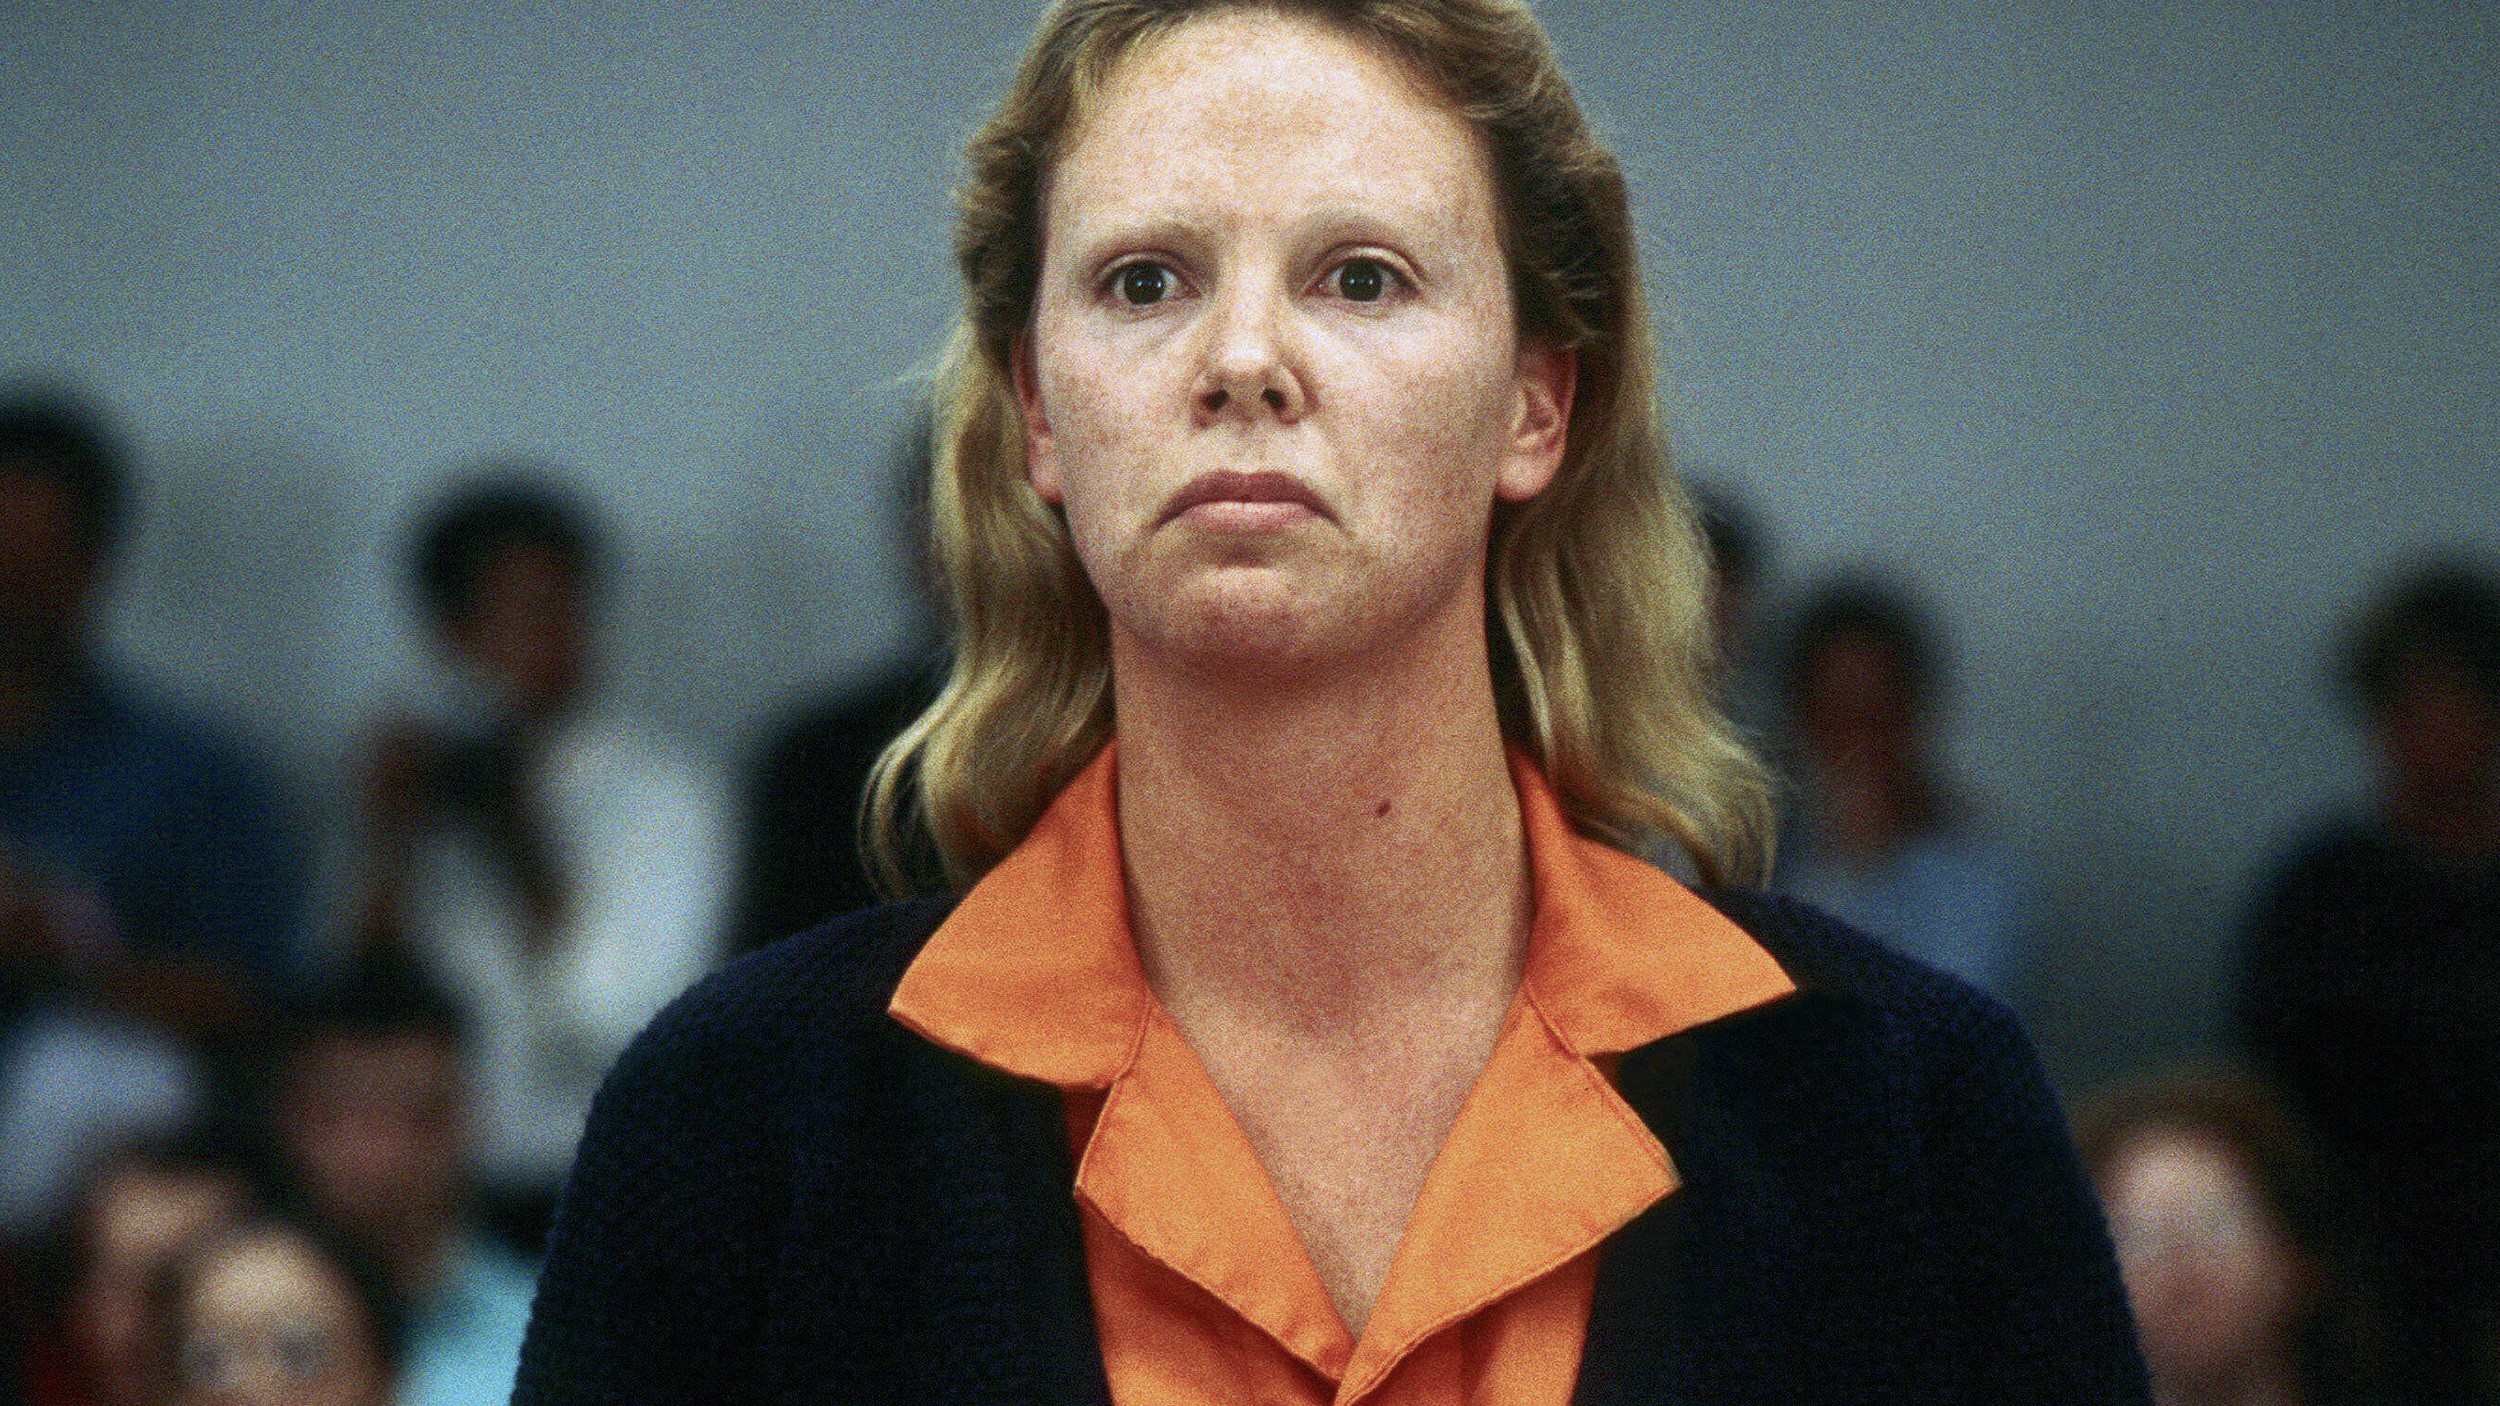 A woman in an orange shirt standing in front of a crowd.